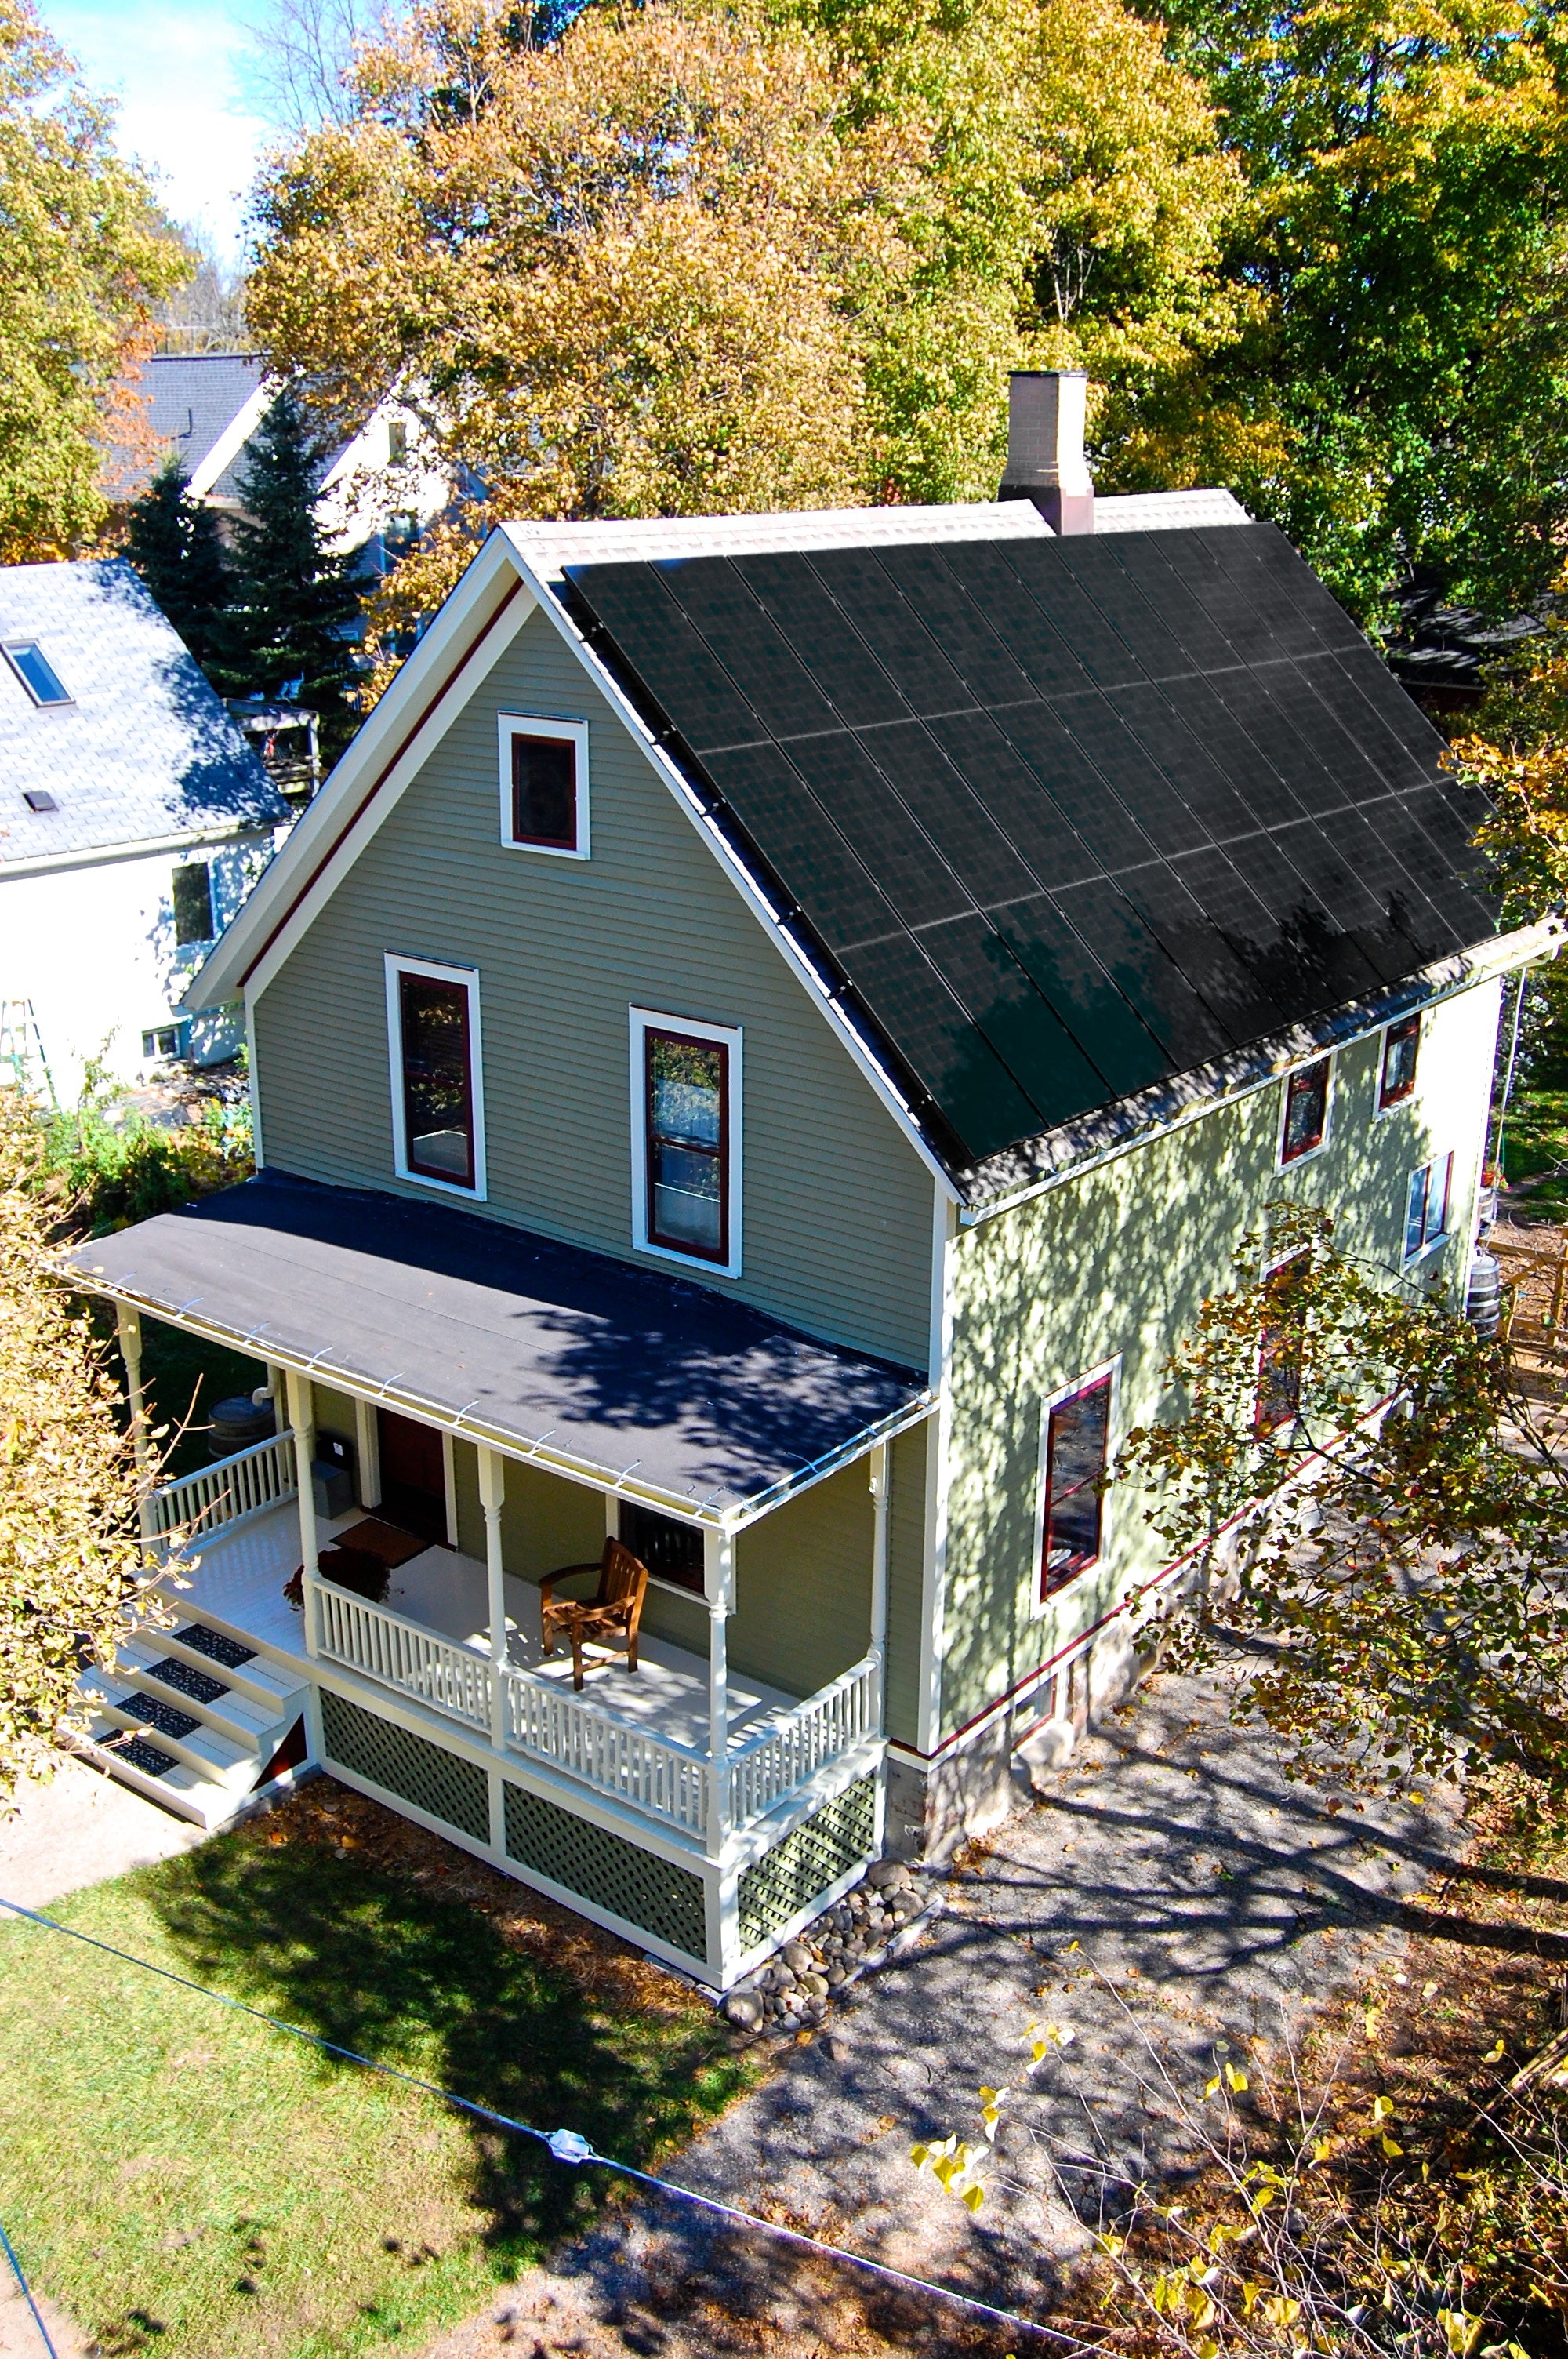 Historic home in Ann Arbor with added solar panels